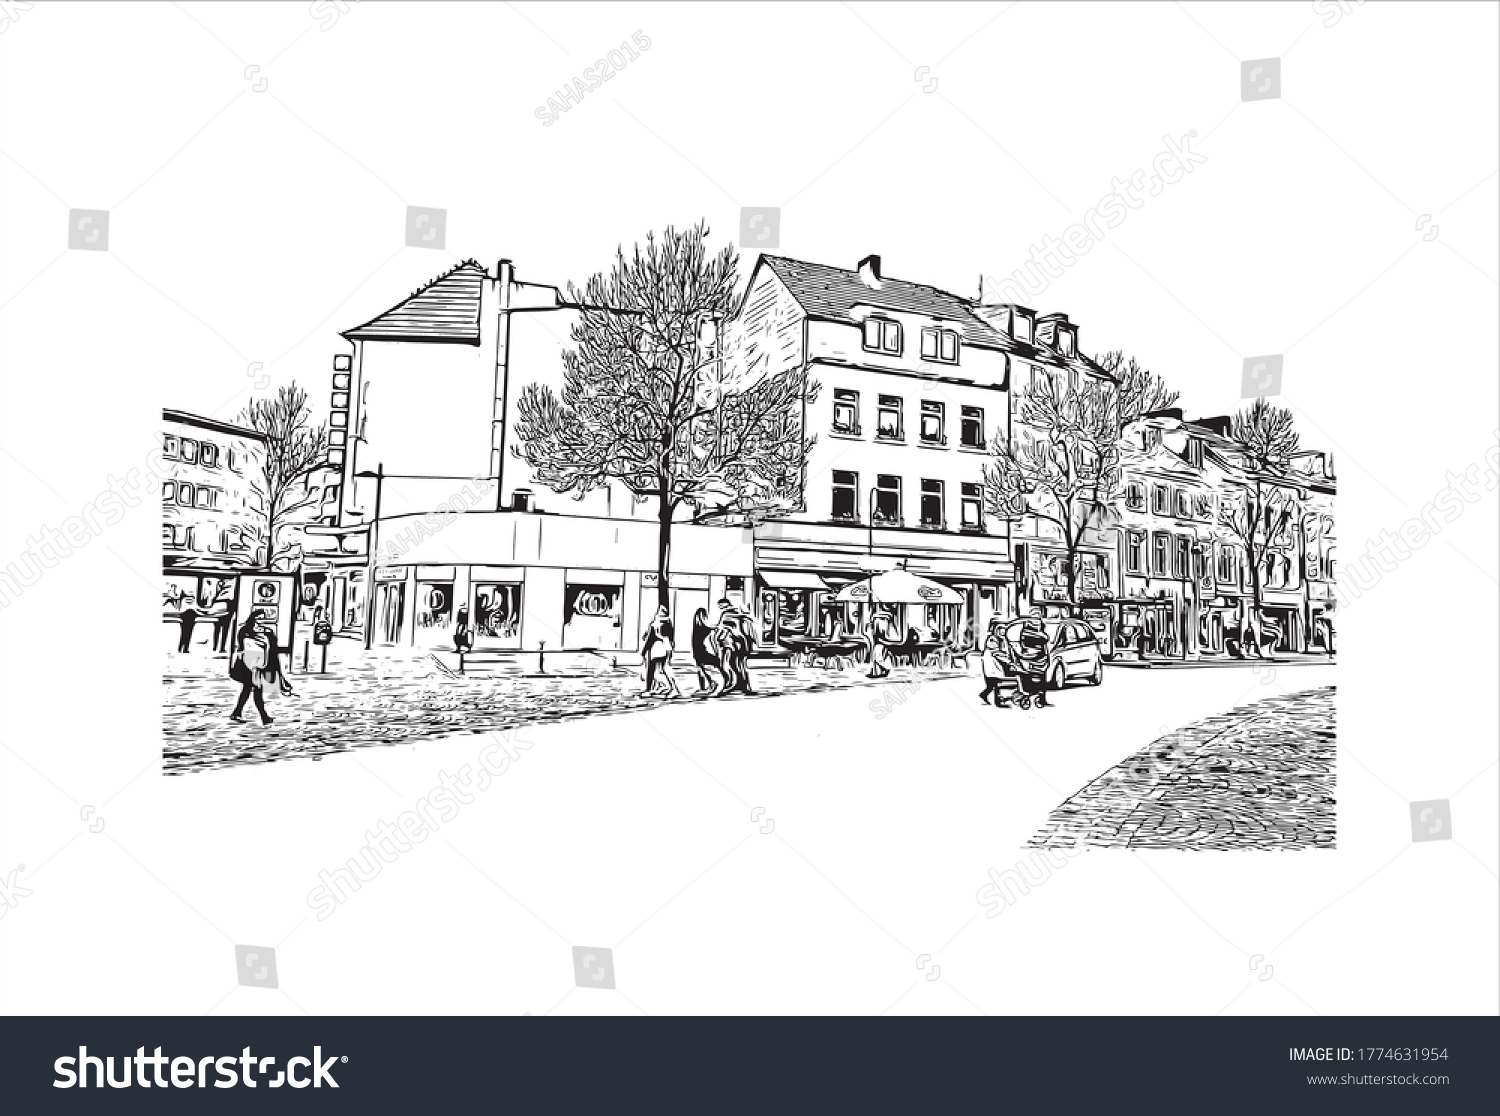 SVG of Building view with landmark of Aachen is a spa city near Germany’s borders with Belgium and the Netherlands. Hand drawn sketch illustration in vector. svg